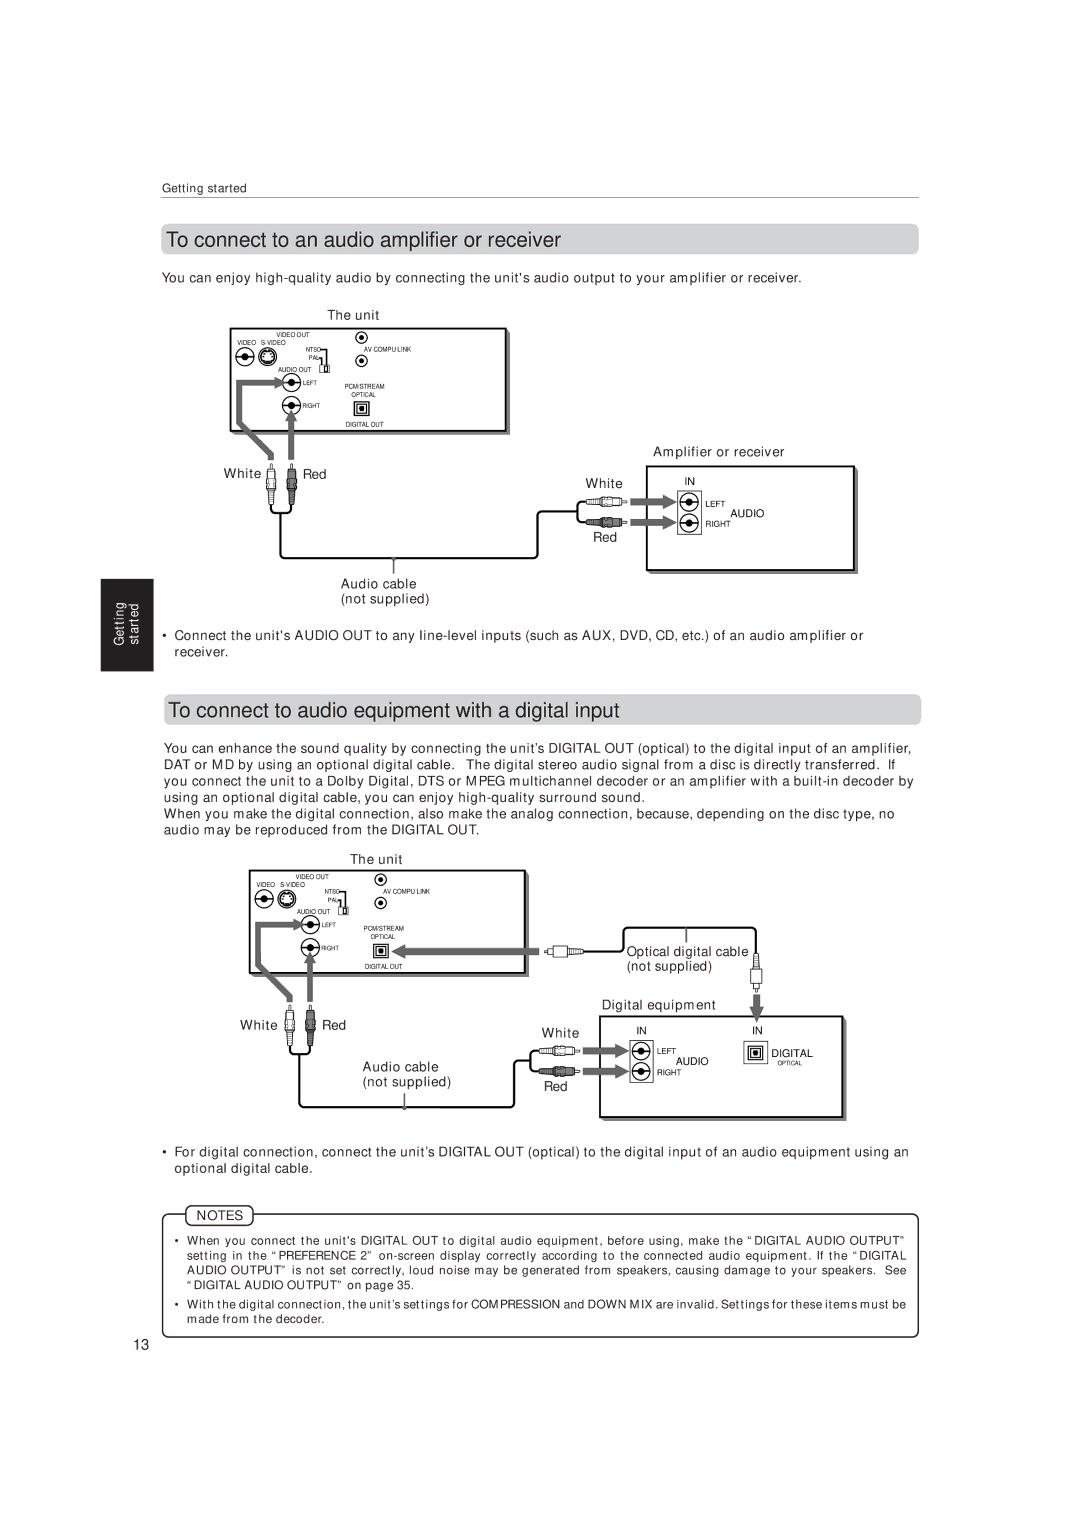 JVC XV-515GD manual To connect to an audio amplifier or receiver, To connect to audio equipment with a digital input, Unit 